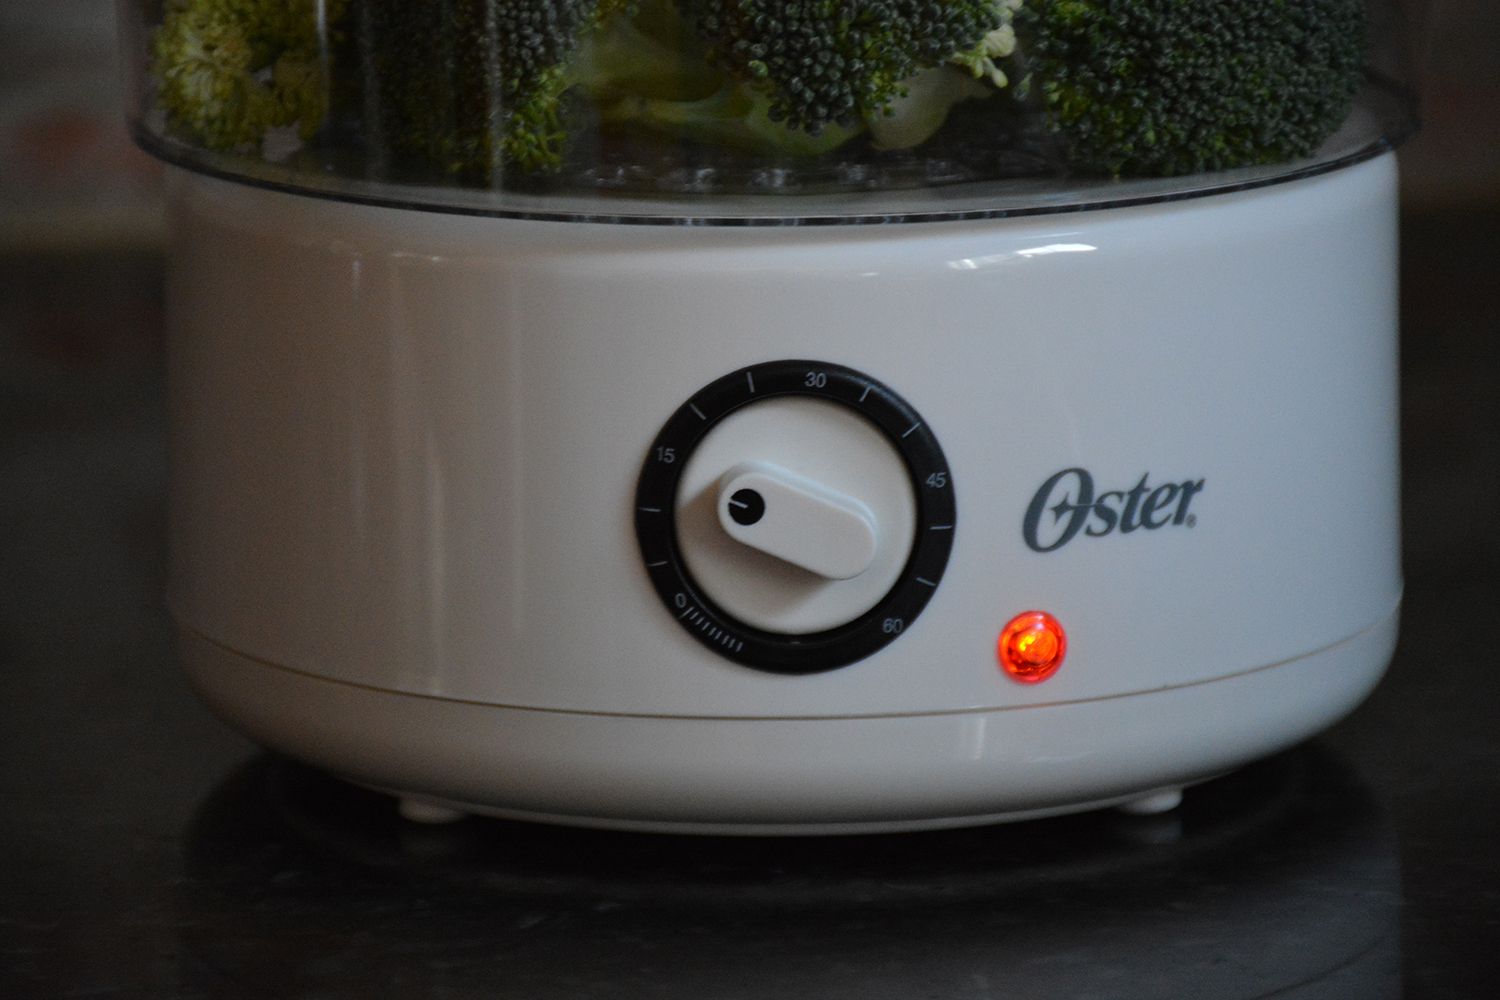 Oster Double-Tiered Food Steamer Review: Versatile and Affordable